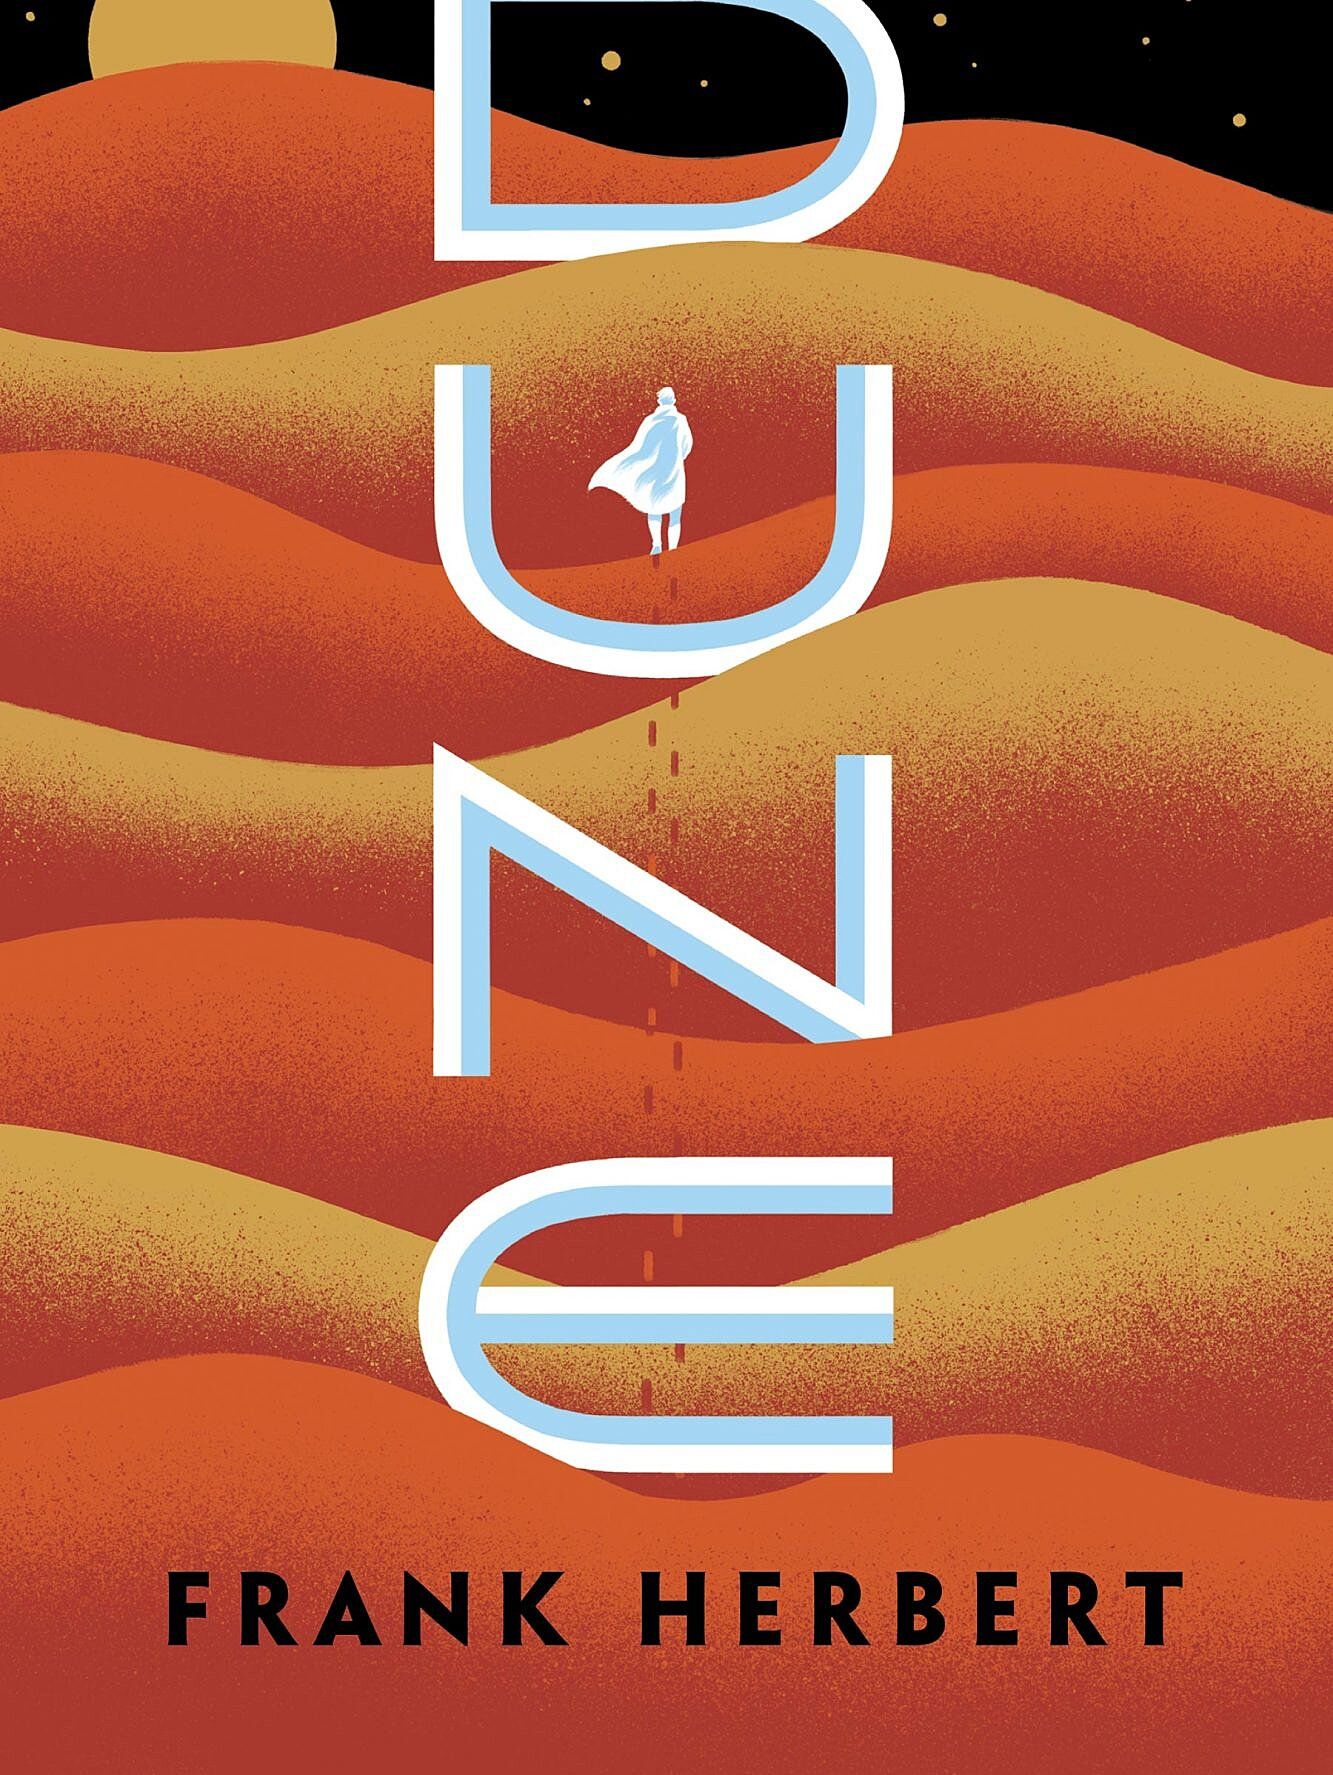 See exclusive first image from the Dune graphic novel